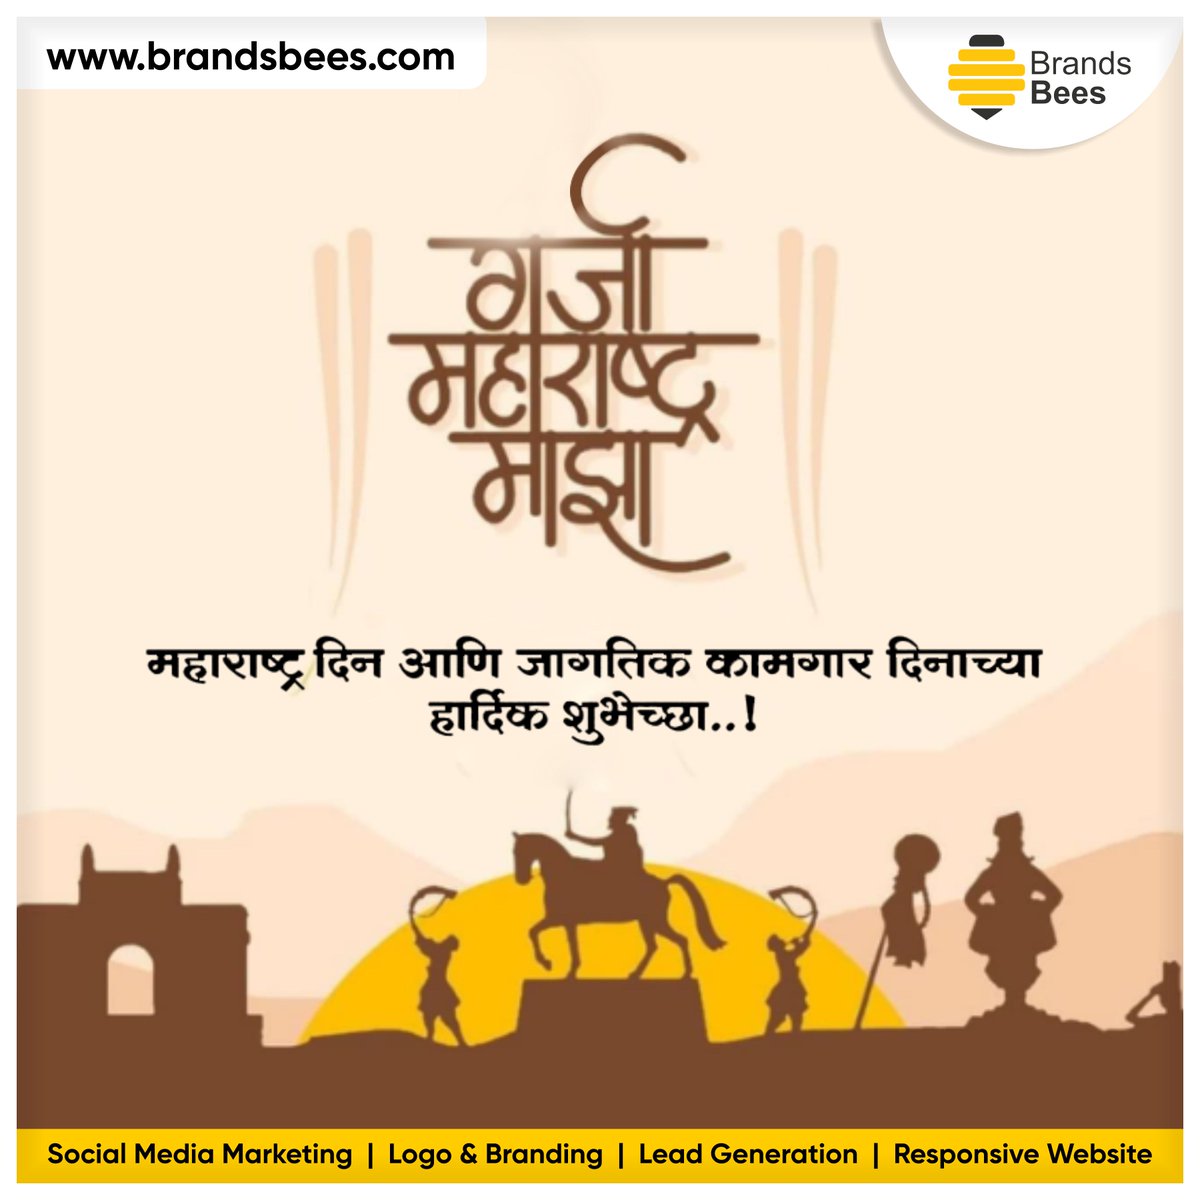 Wishing you a #MaharashtraDay filled with pride, joy, and the promise of a brighter future.

To know more visit brandsbees.com

.

.

.

#WebsiteDesign #WebsiteDevelopment #Branding #digitalmarketing #digitalagency #digitalbusinesstransformation #SEO #seoservices